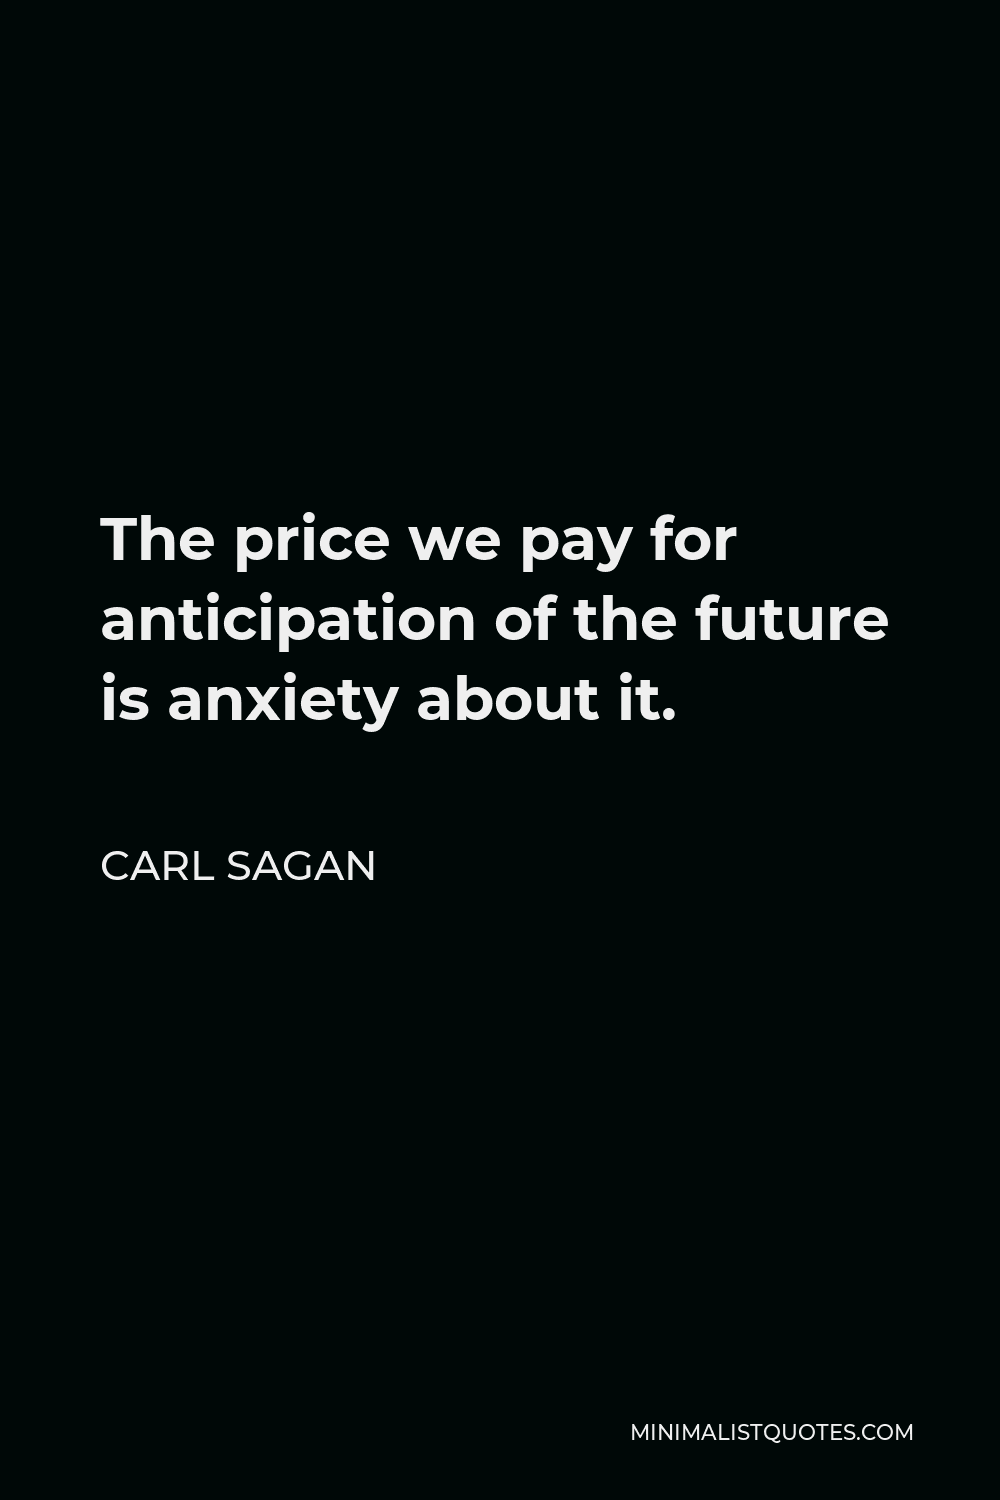 Carl Sagan Quote - The price we pay for anticipation of the future is anxiety about it.